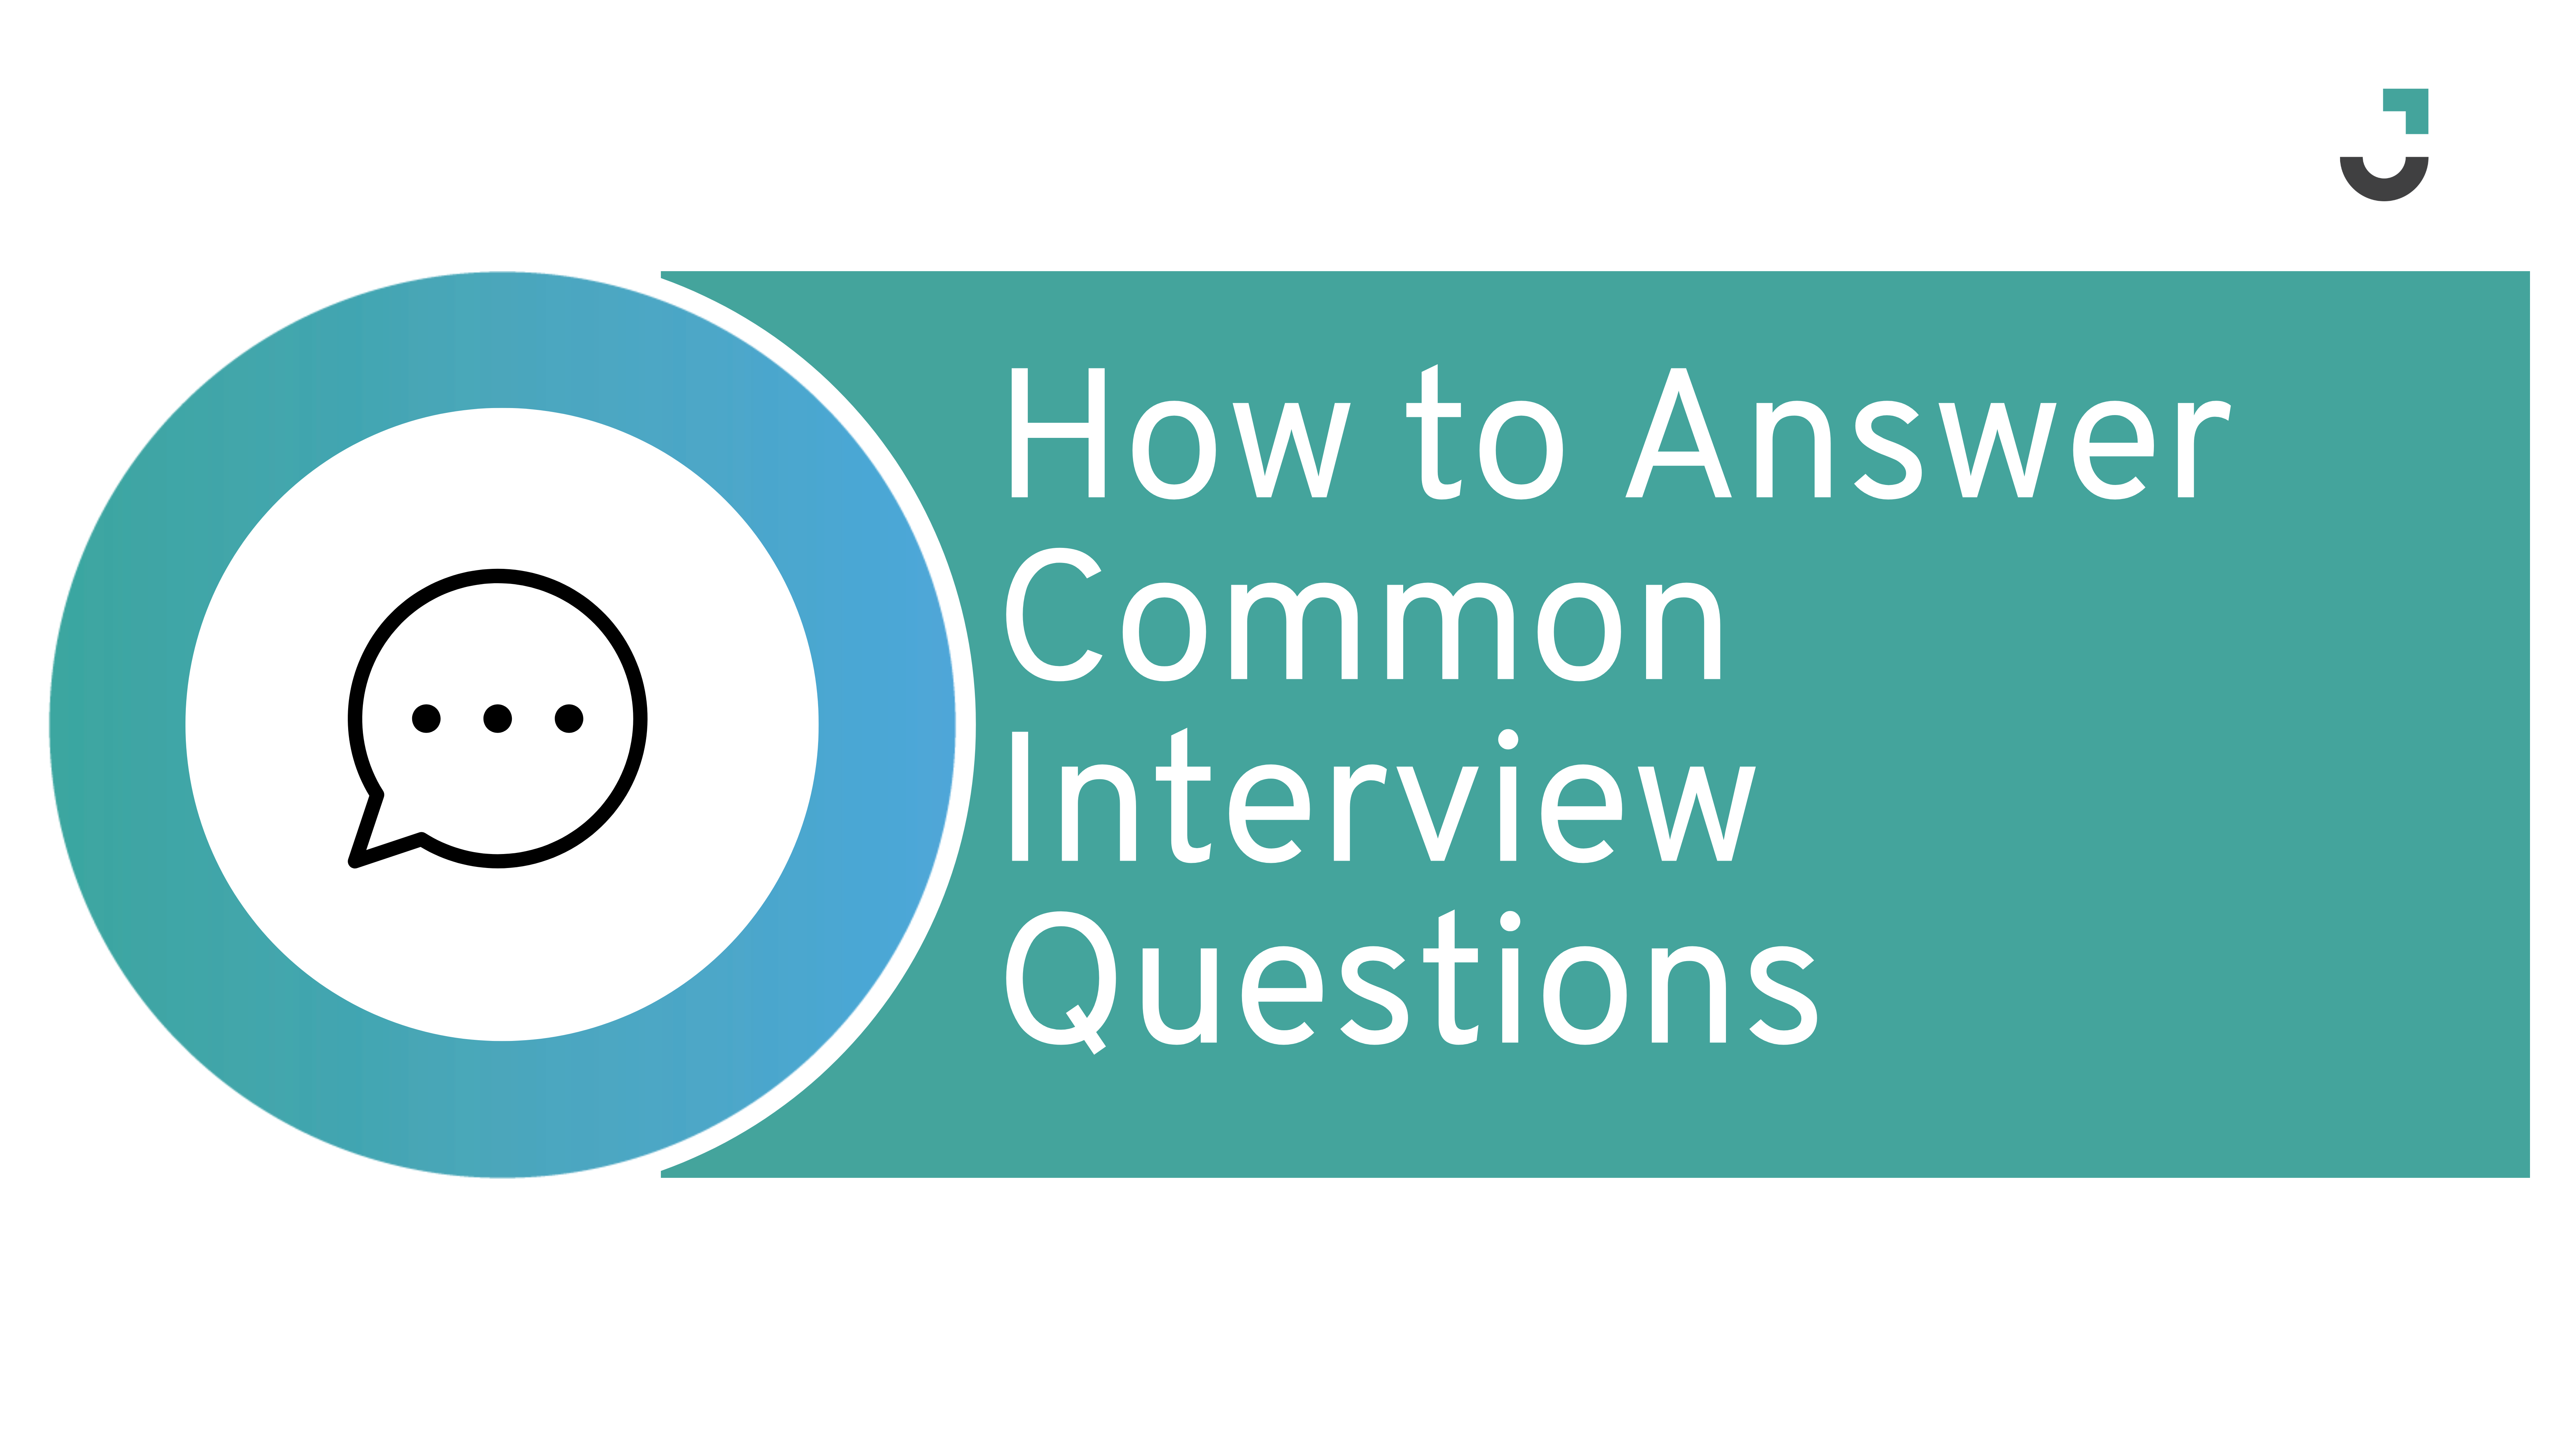 Mastering the Art of Answering Common Job Interview Questions